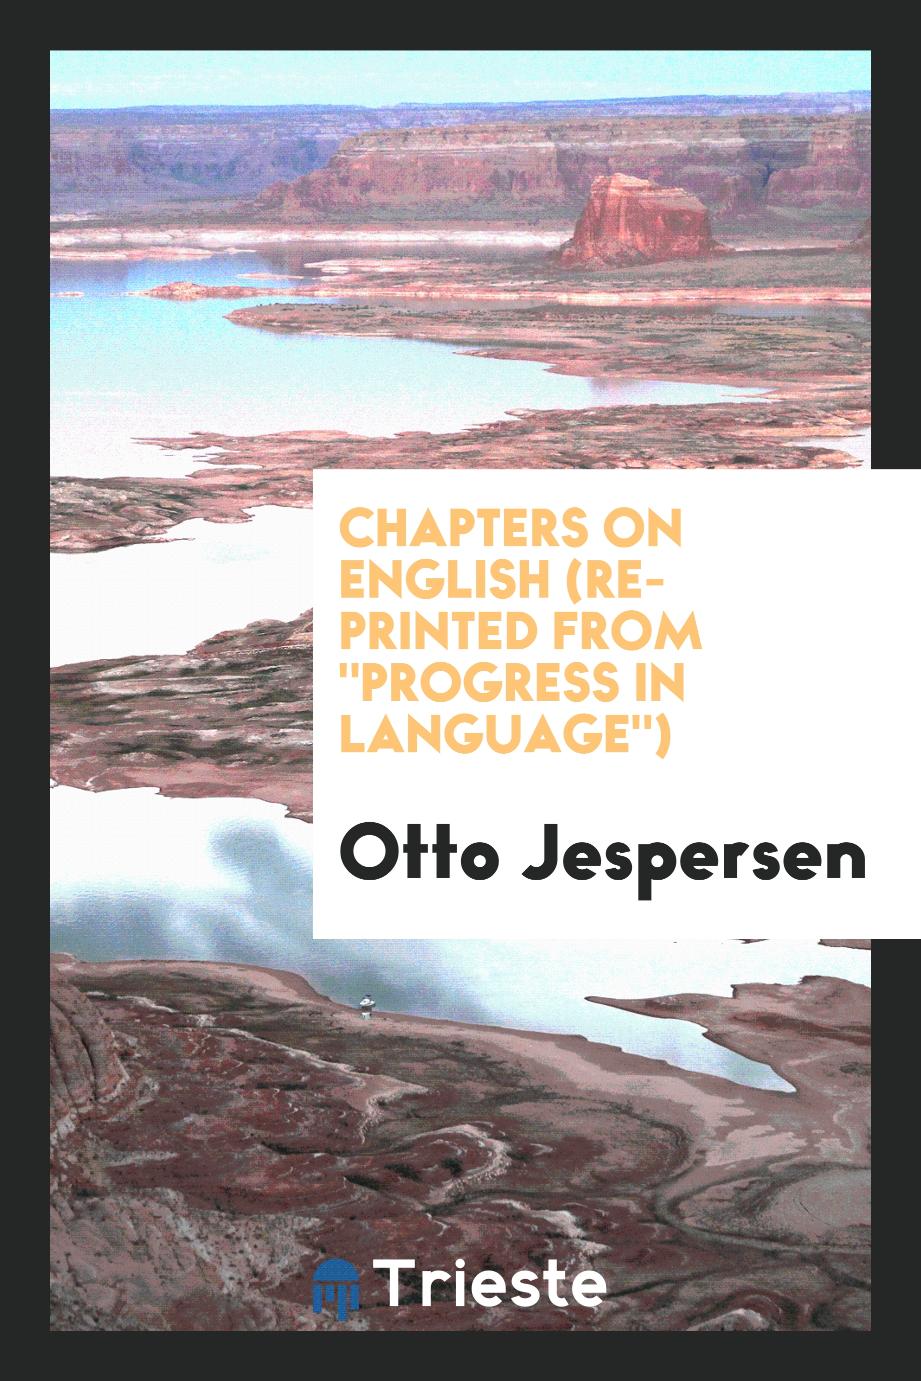 Chapters on English (re-printed from "Progress in language")